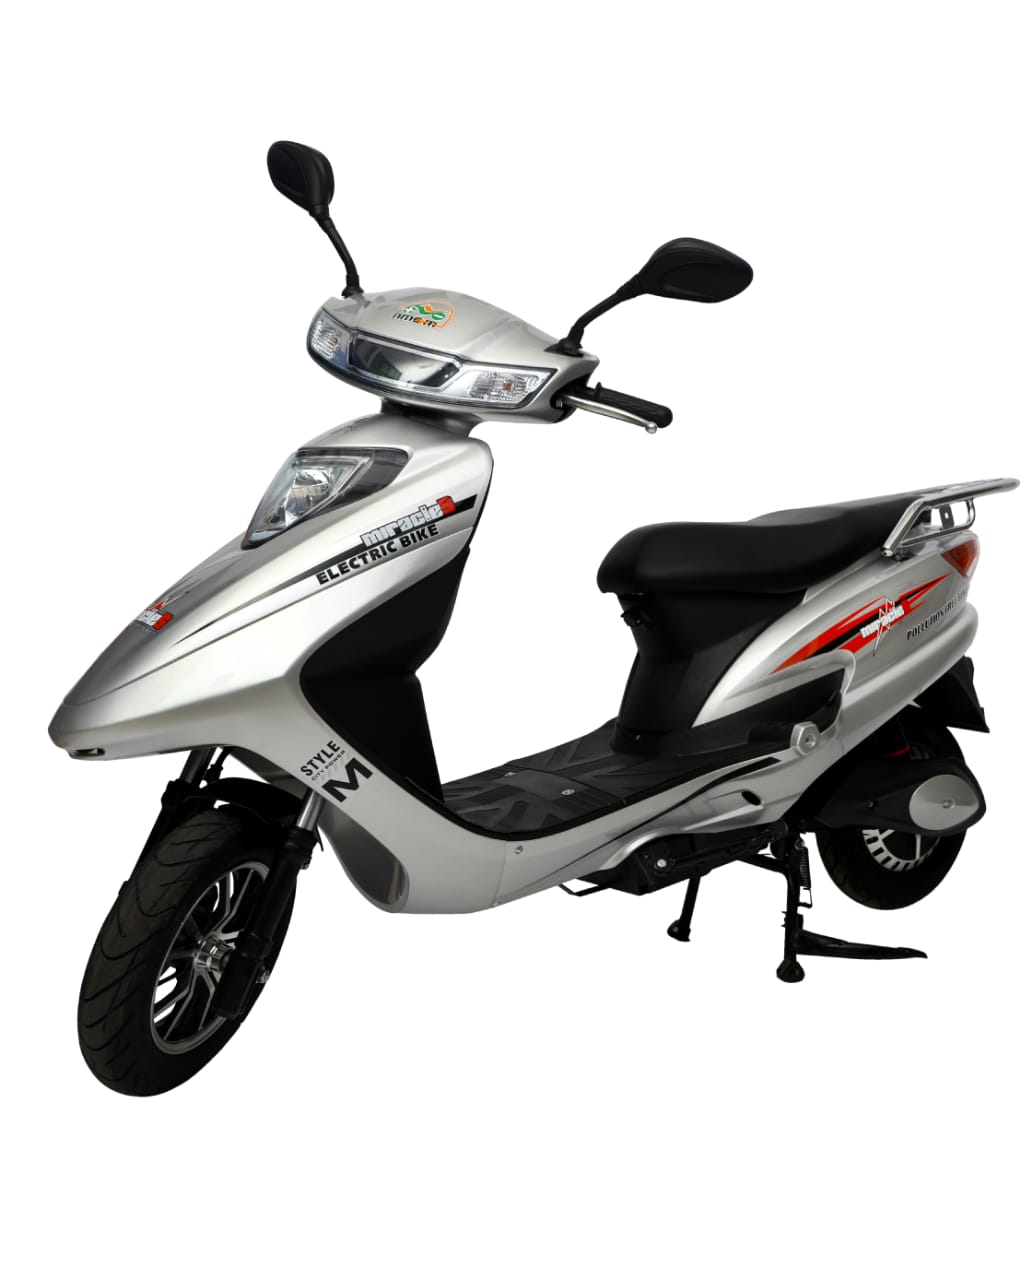 Best Electric Bike and Scooter in India |Miracle 5Cars and BikesScootersAll Indiaother